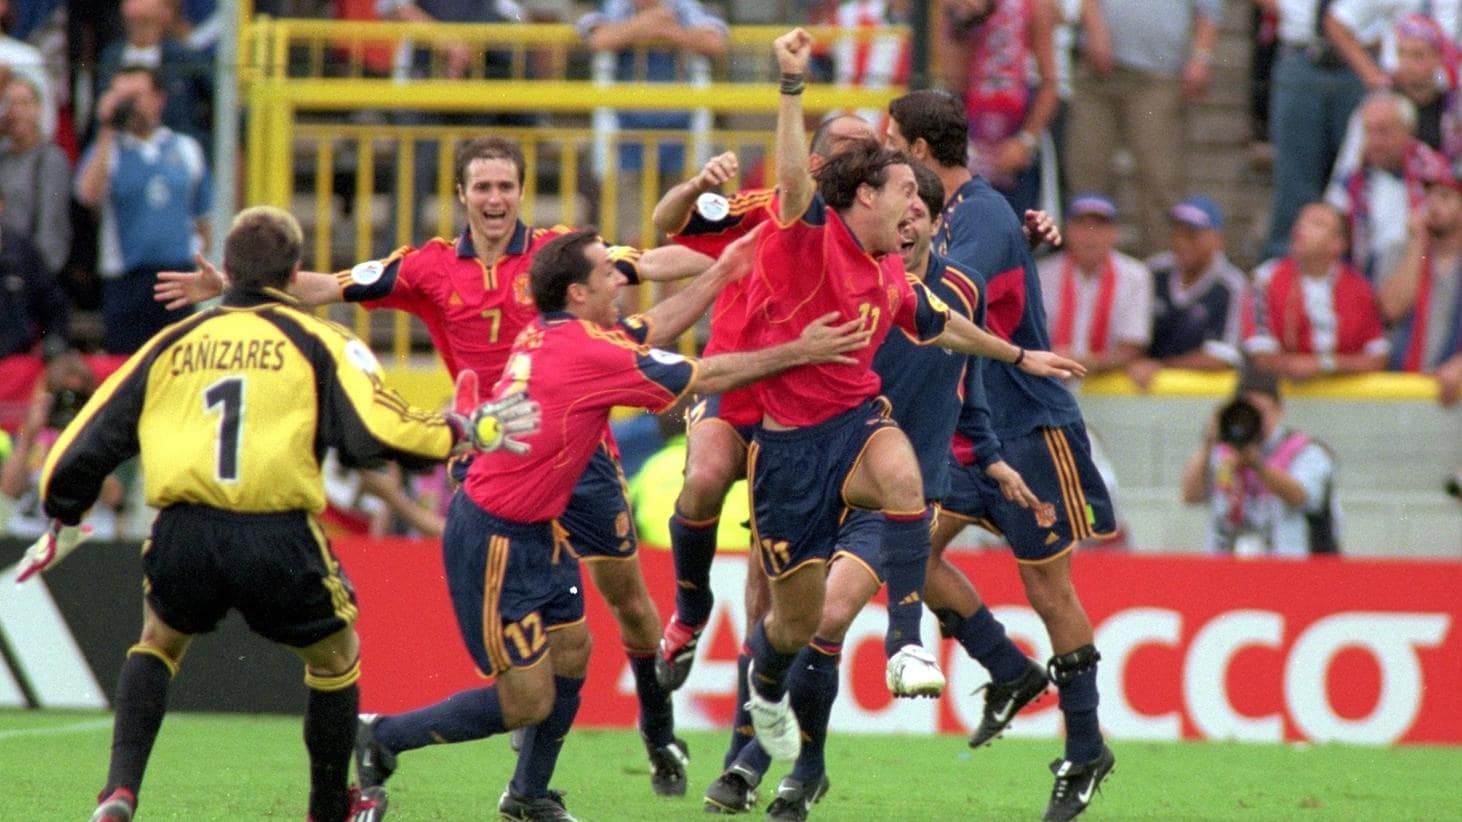 spain_celebrate_alfonso_perez_s_dramatic_winner_in_their_4-3_group-stage_triumph_against_yugoslavia_in_2000.jpeg